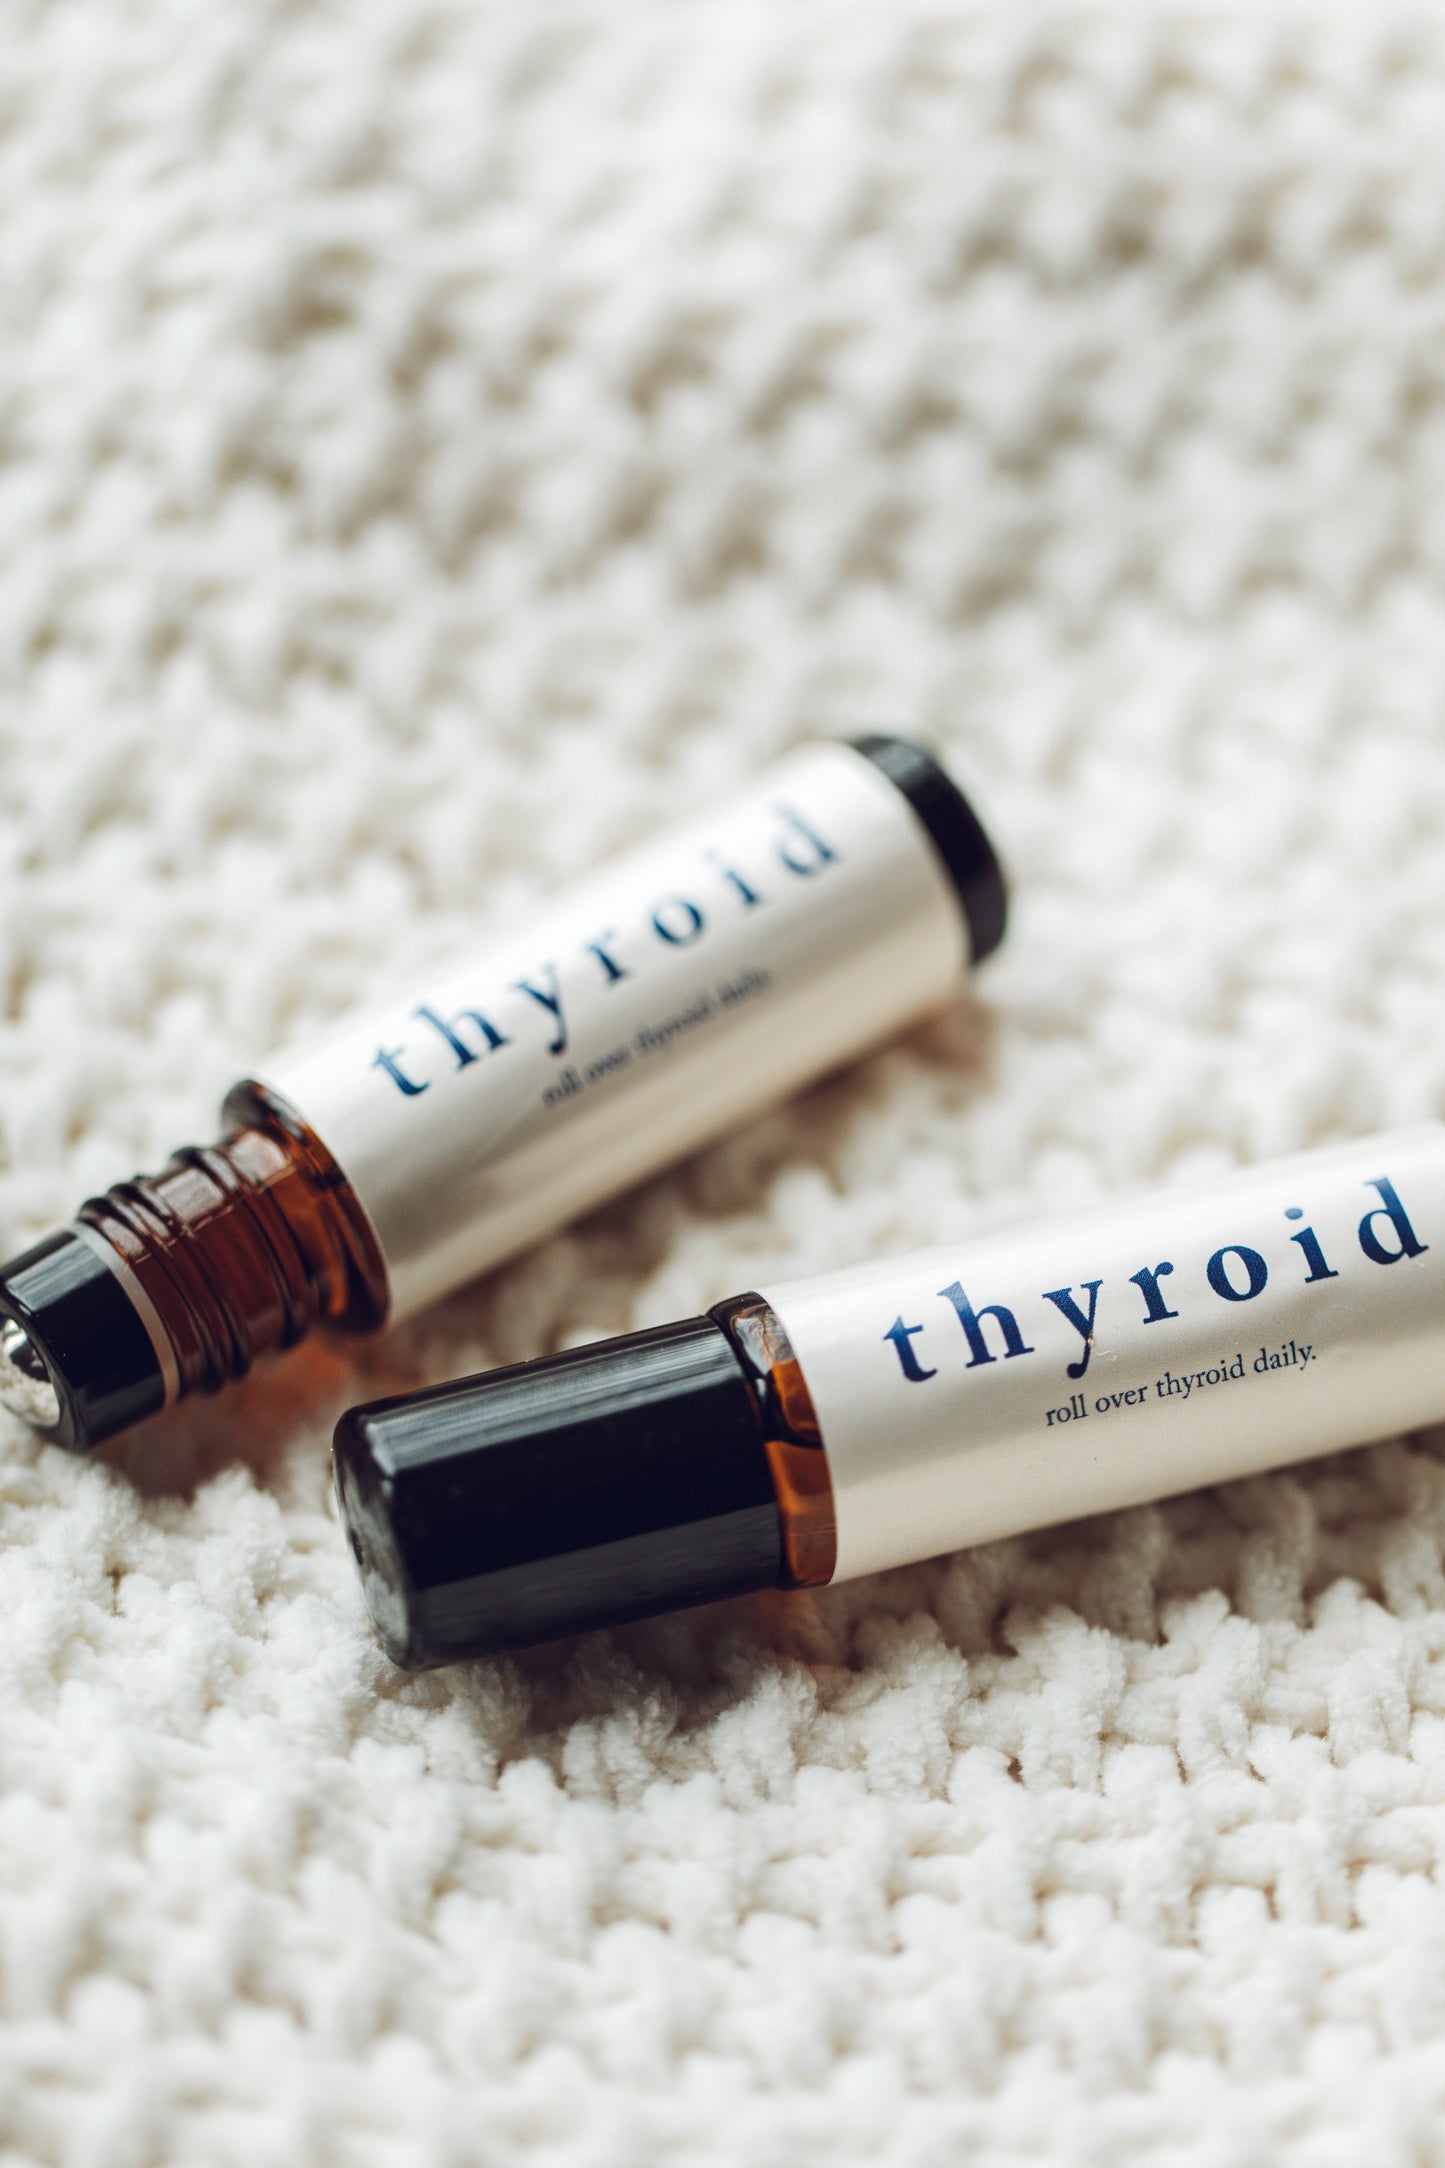 Thyroid Support Roll On | Wellness Gift + Self Care | Happy Thyroid Hormones | Low Energy + Hormone Holistic Support | Hormone Balance Kit